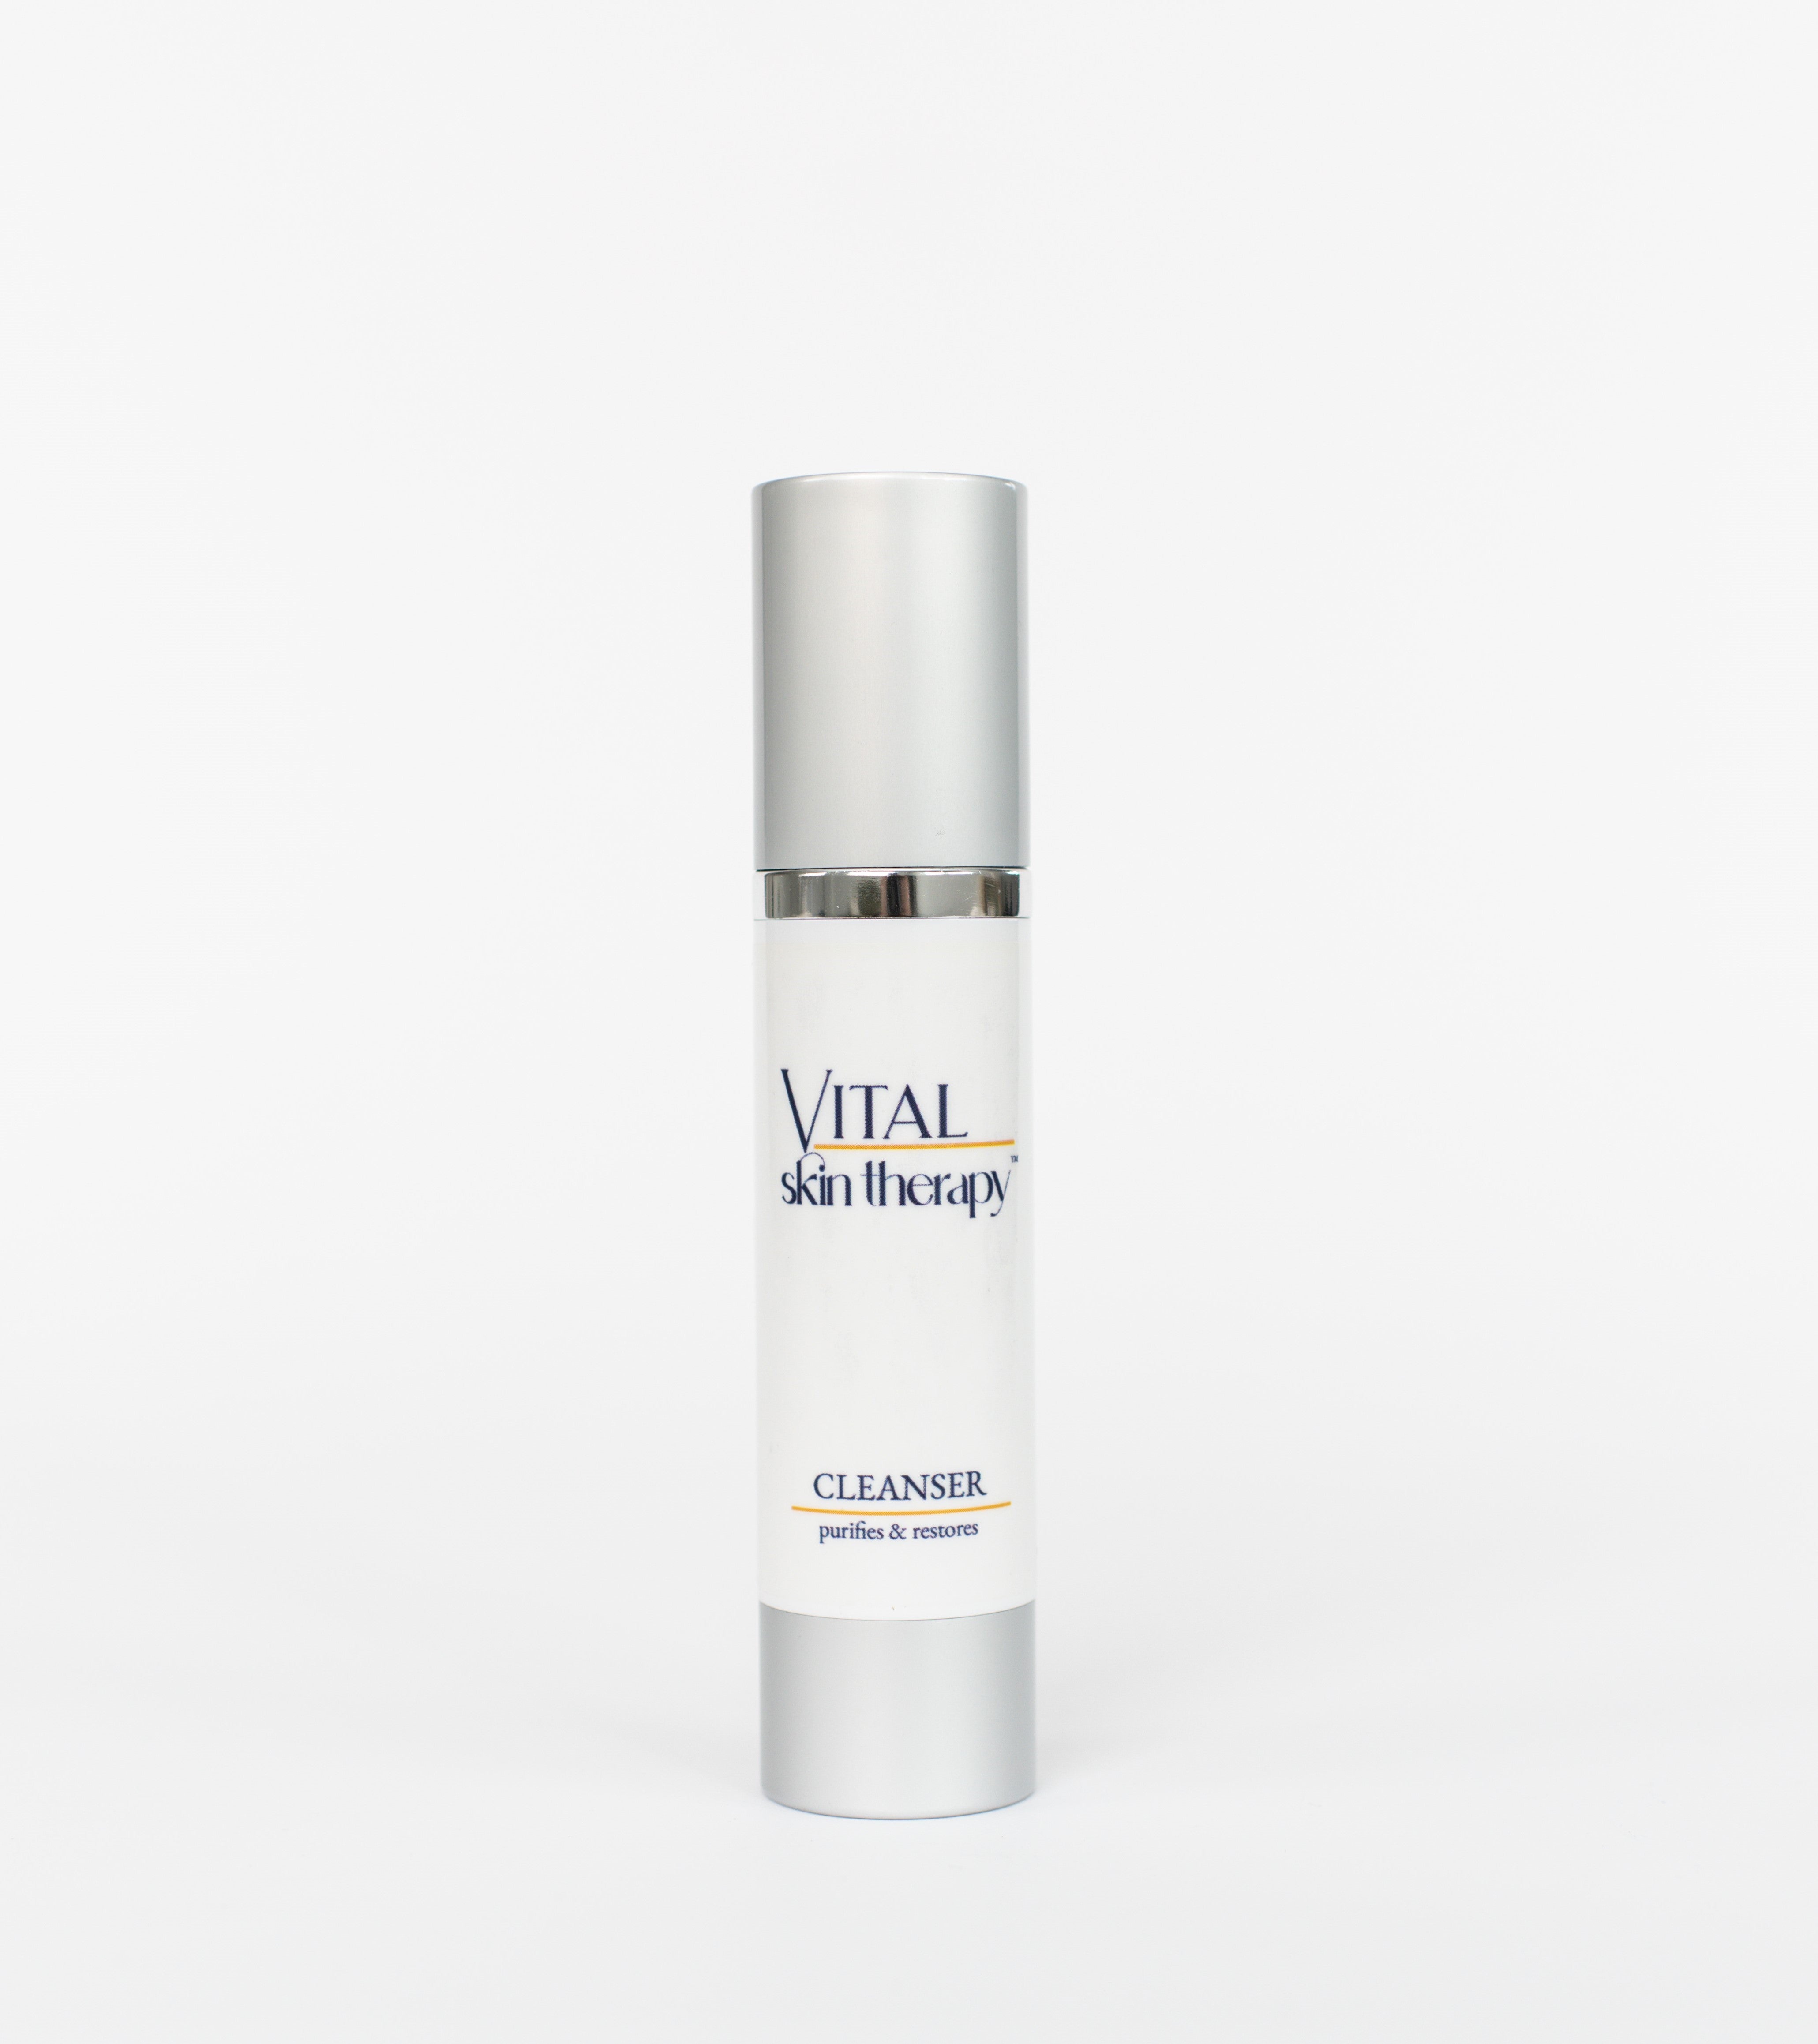 Vital Skin Therapy Cleanser